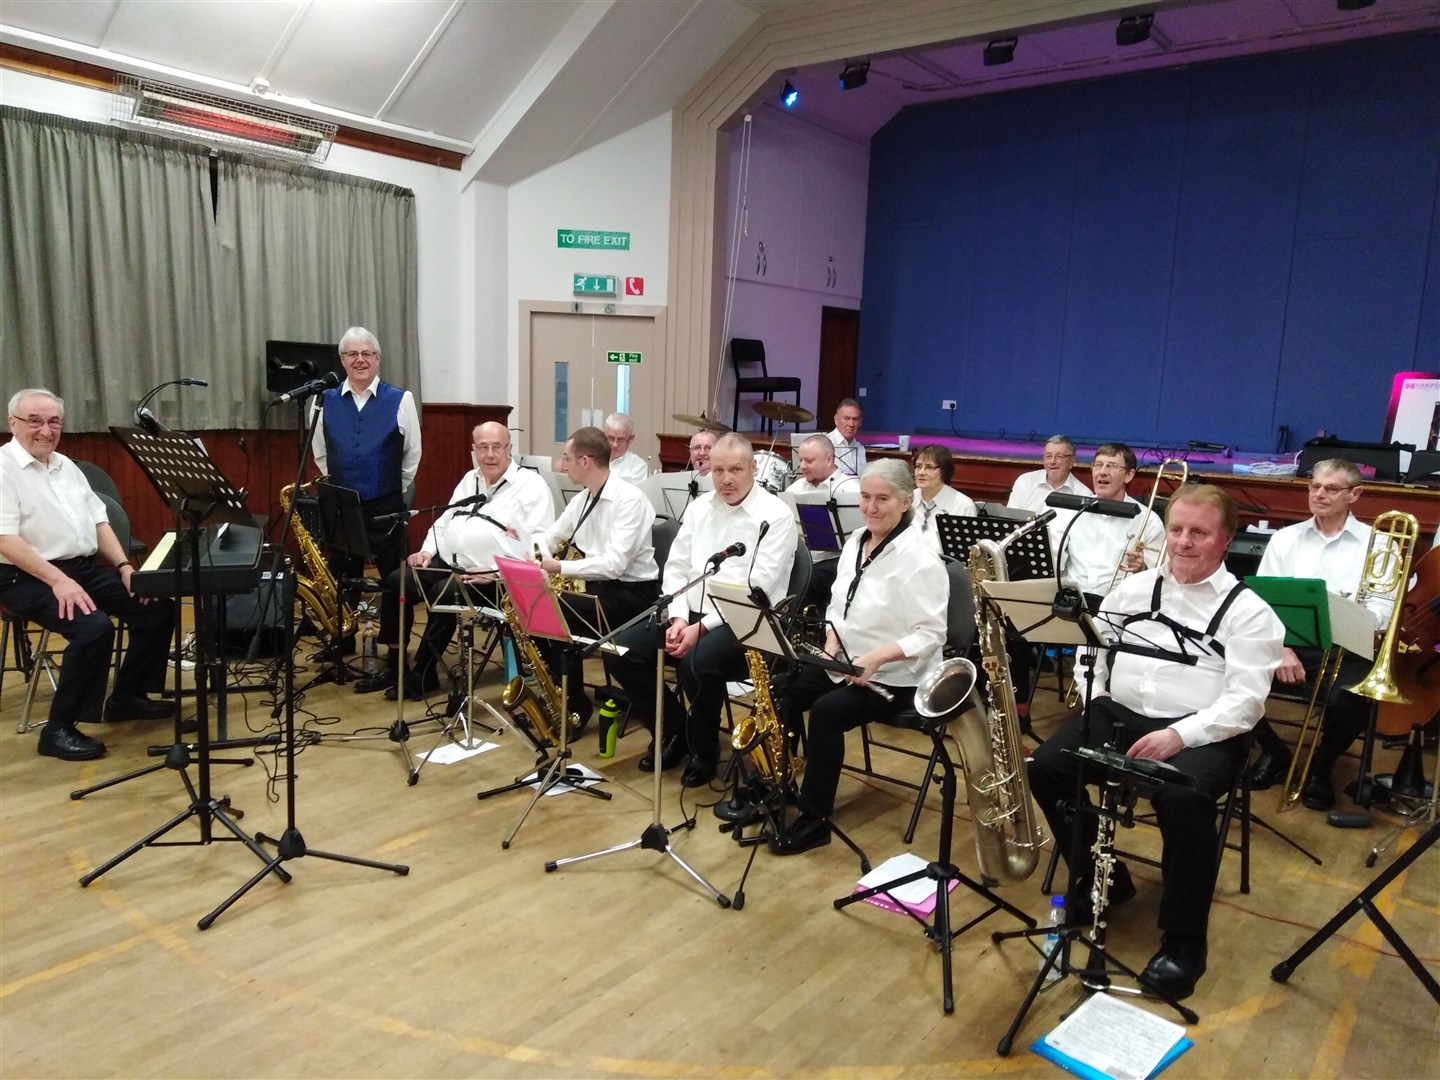 Musicians tune up for Mario Jannetta's Big Band Night.